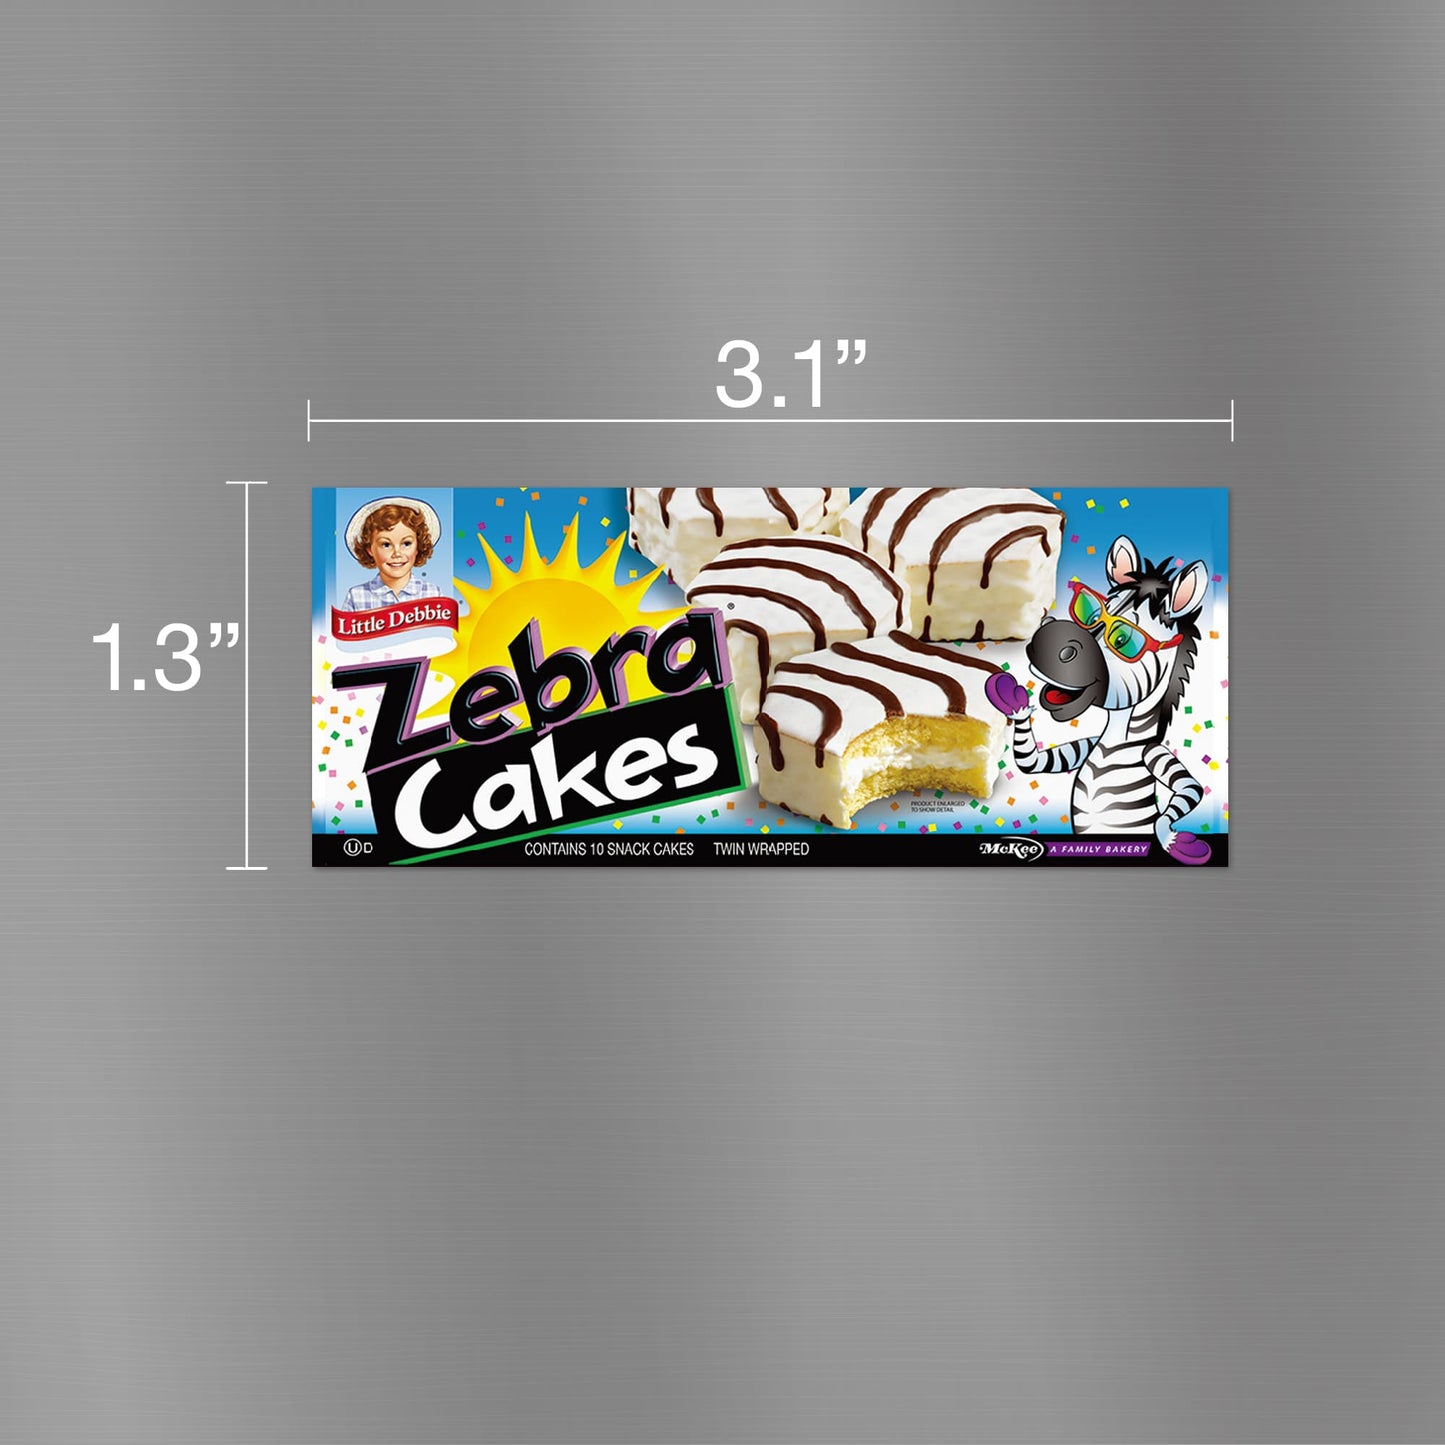 Image of a Little Debbie Zebra Cakes carton magnet, measuring 3.1 inches wide and 1.3 inches tall. The magnet displays a playful design featuring a zebra character holding an ice cream cone, set against a colorful backdrop with a depiction of the actual Zebra Cake snack. The packaging includes the Little Debbie logo and mentions 'contains 10 snack cakes, twin wrapped'.